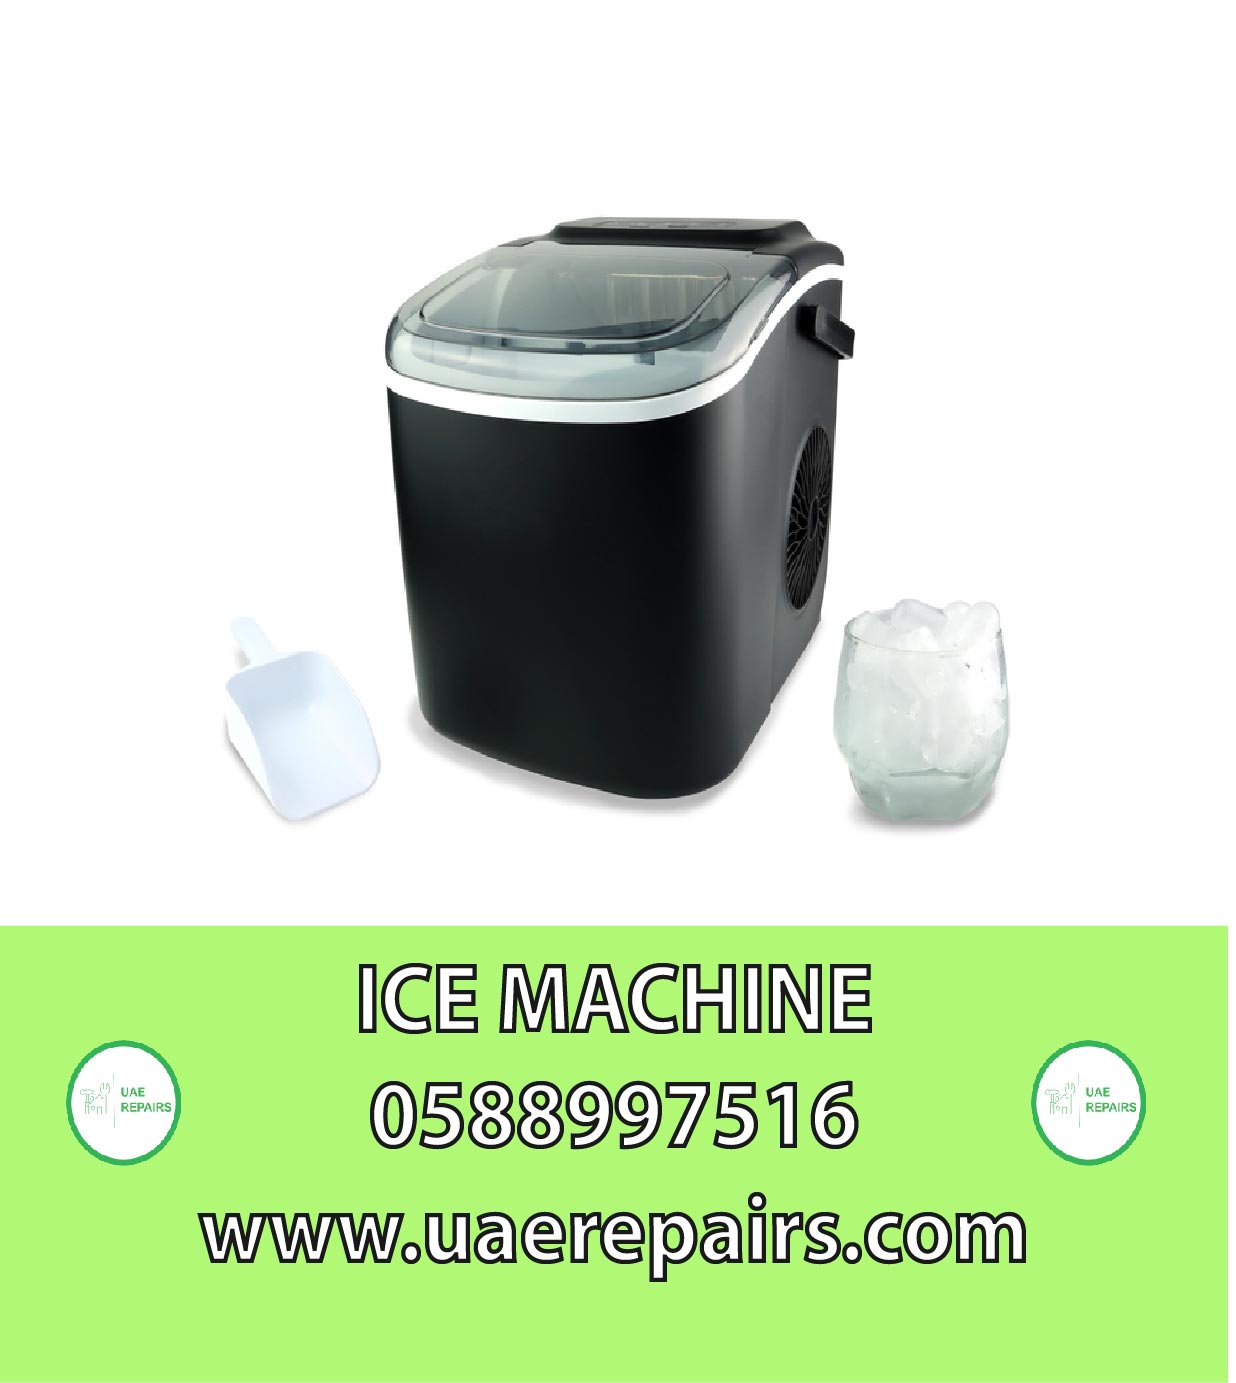 UAE REPAIRS ICE MACHINE IMPORTANCE AND MAINTEANCE CONTACT US 0588997516